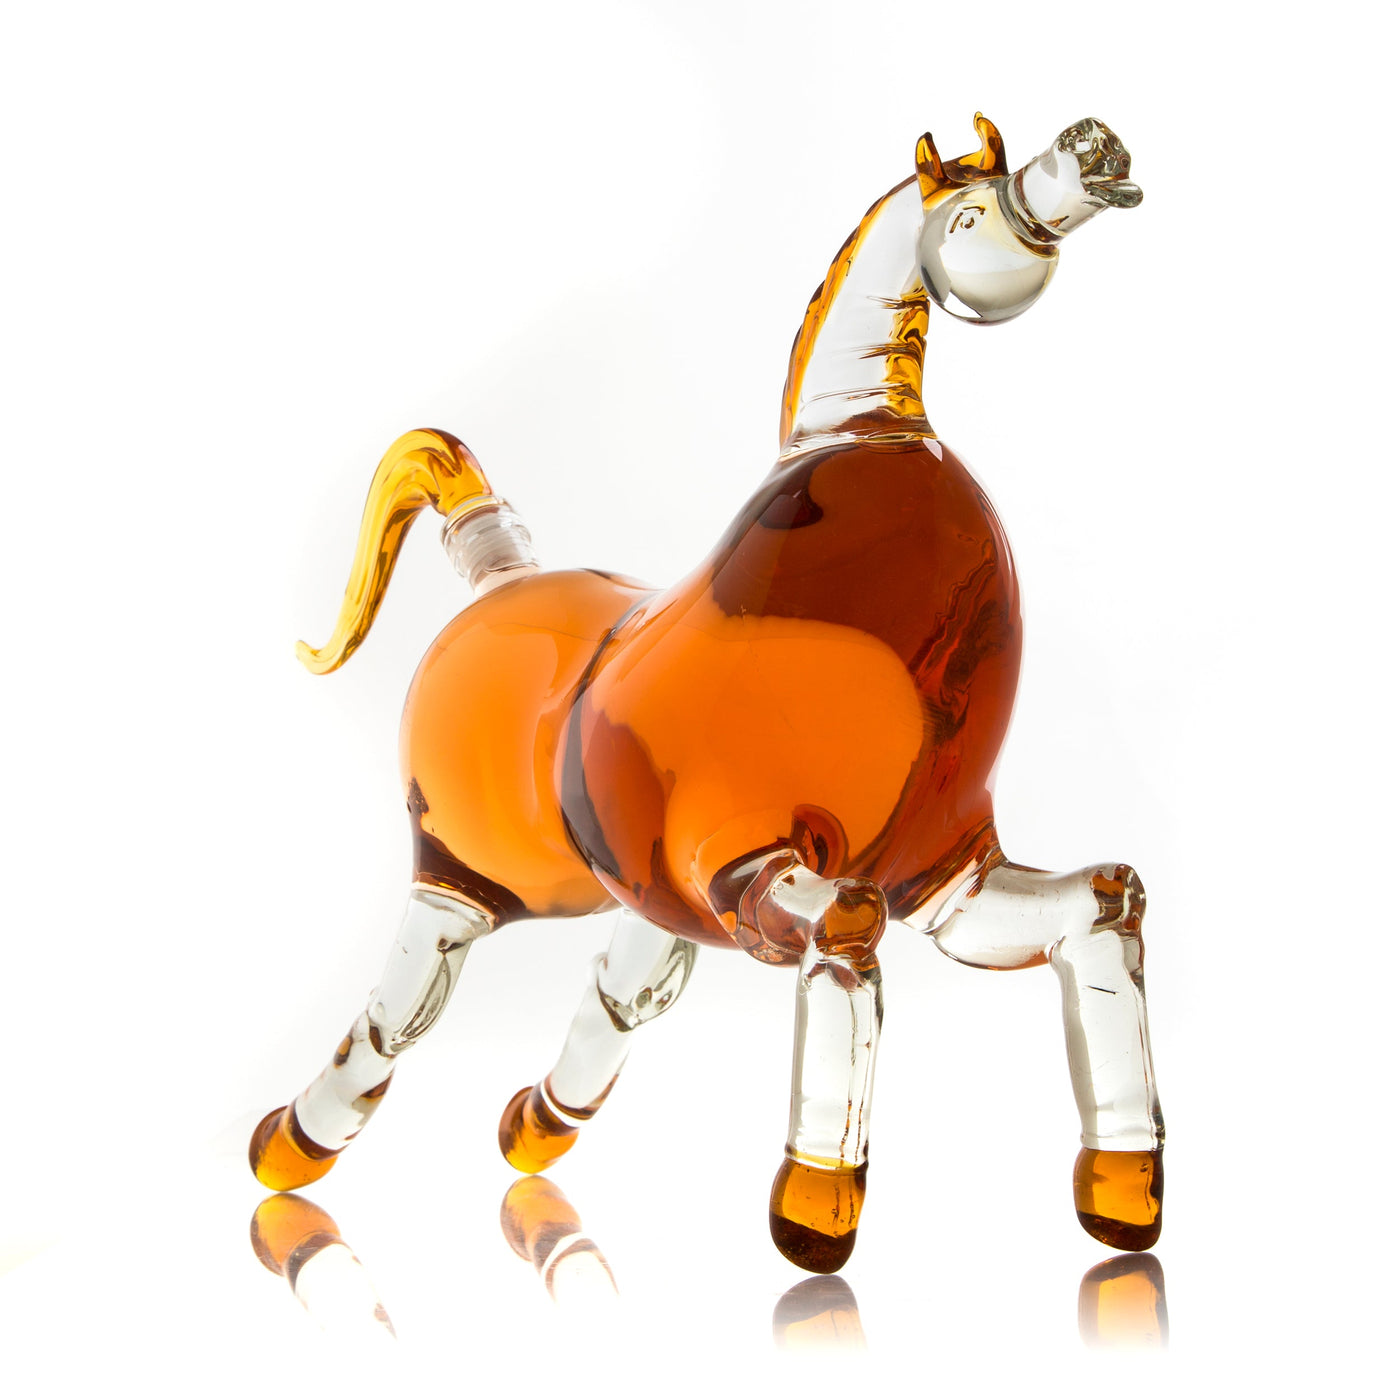 The Wine Savant Horse Derby Decanter for Bourbon, Whiskey, Scotch, Vodka, Rum, Tequila or Any Other Drink 1000ml Decanter (Horse) by The Wine Savant